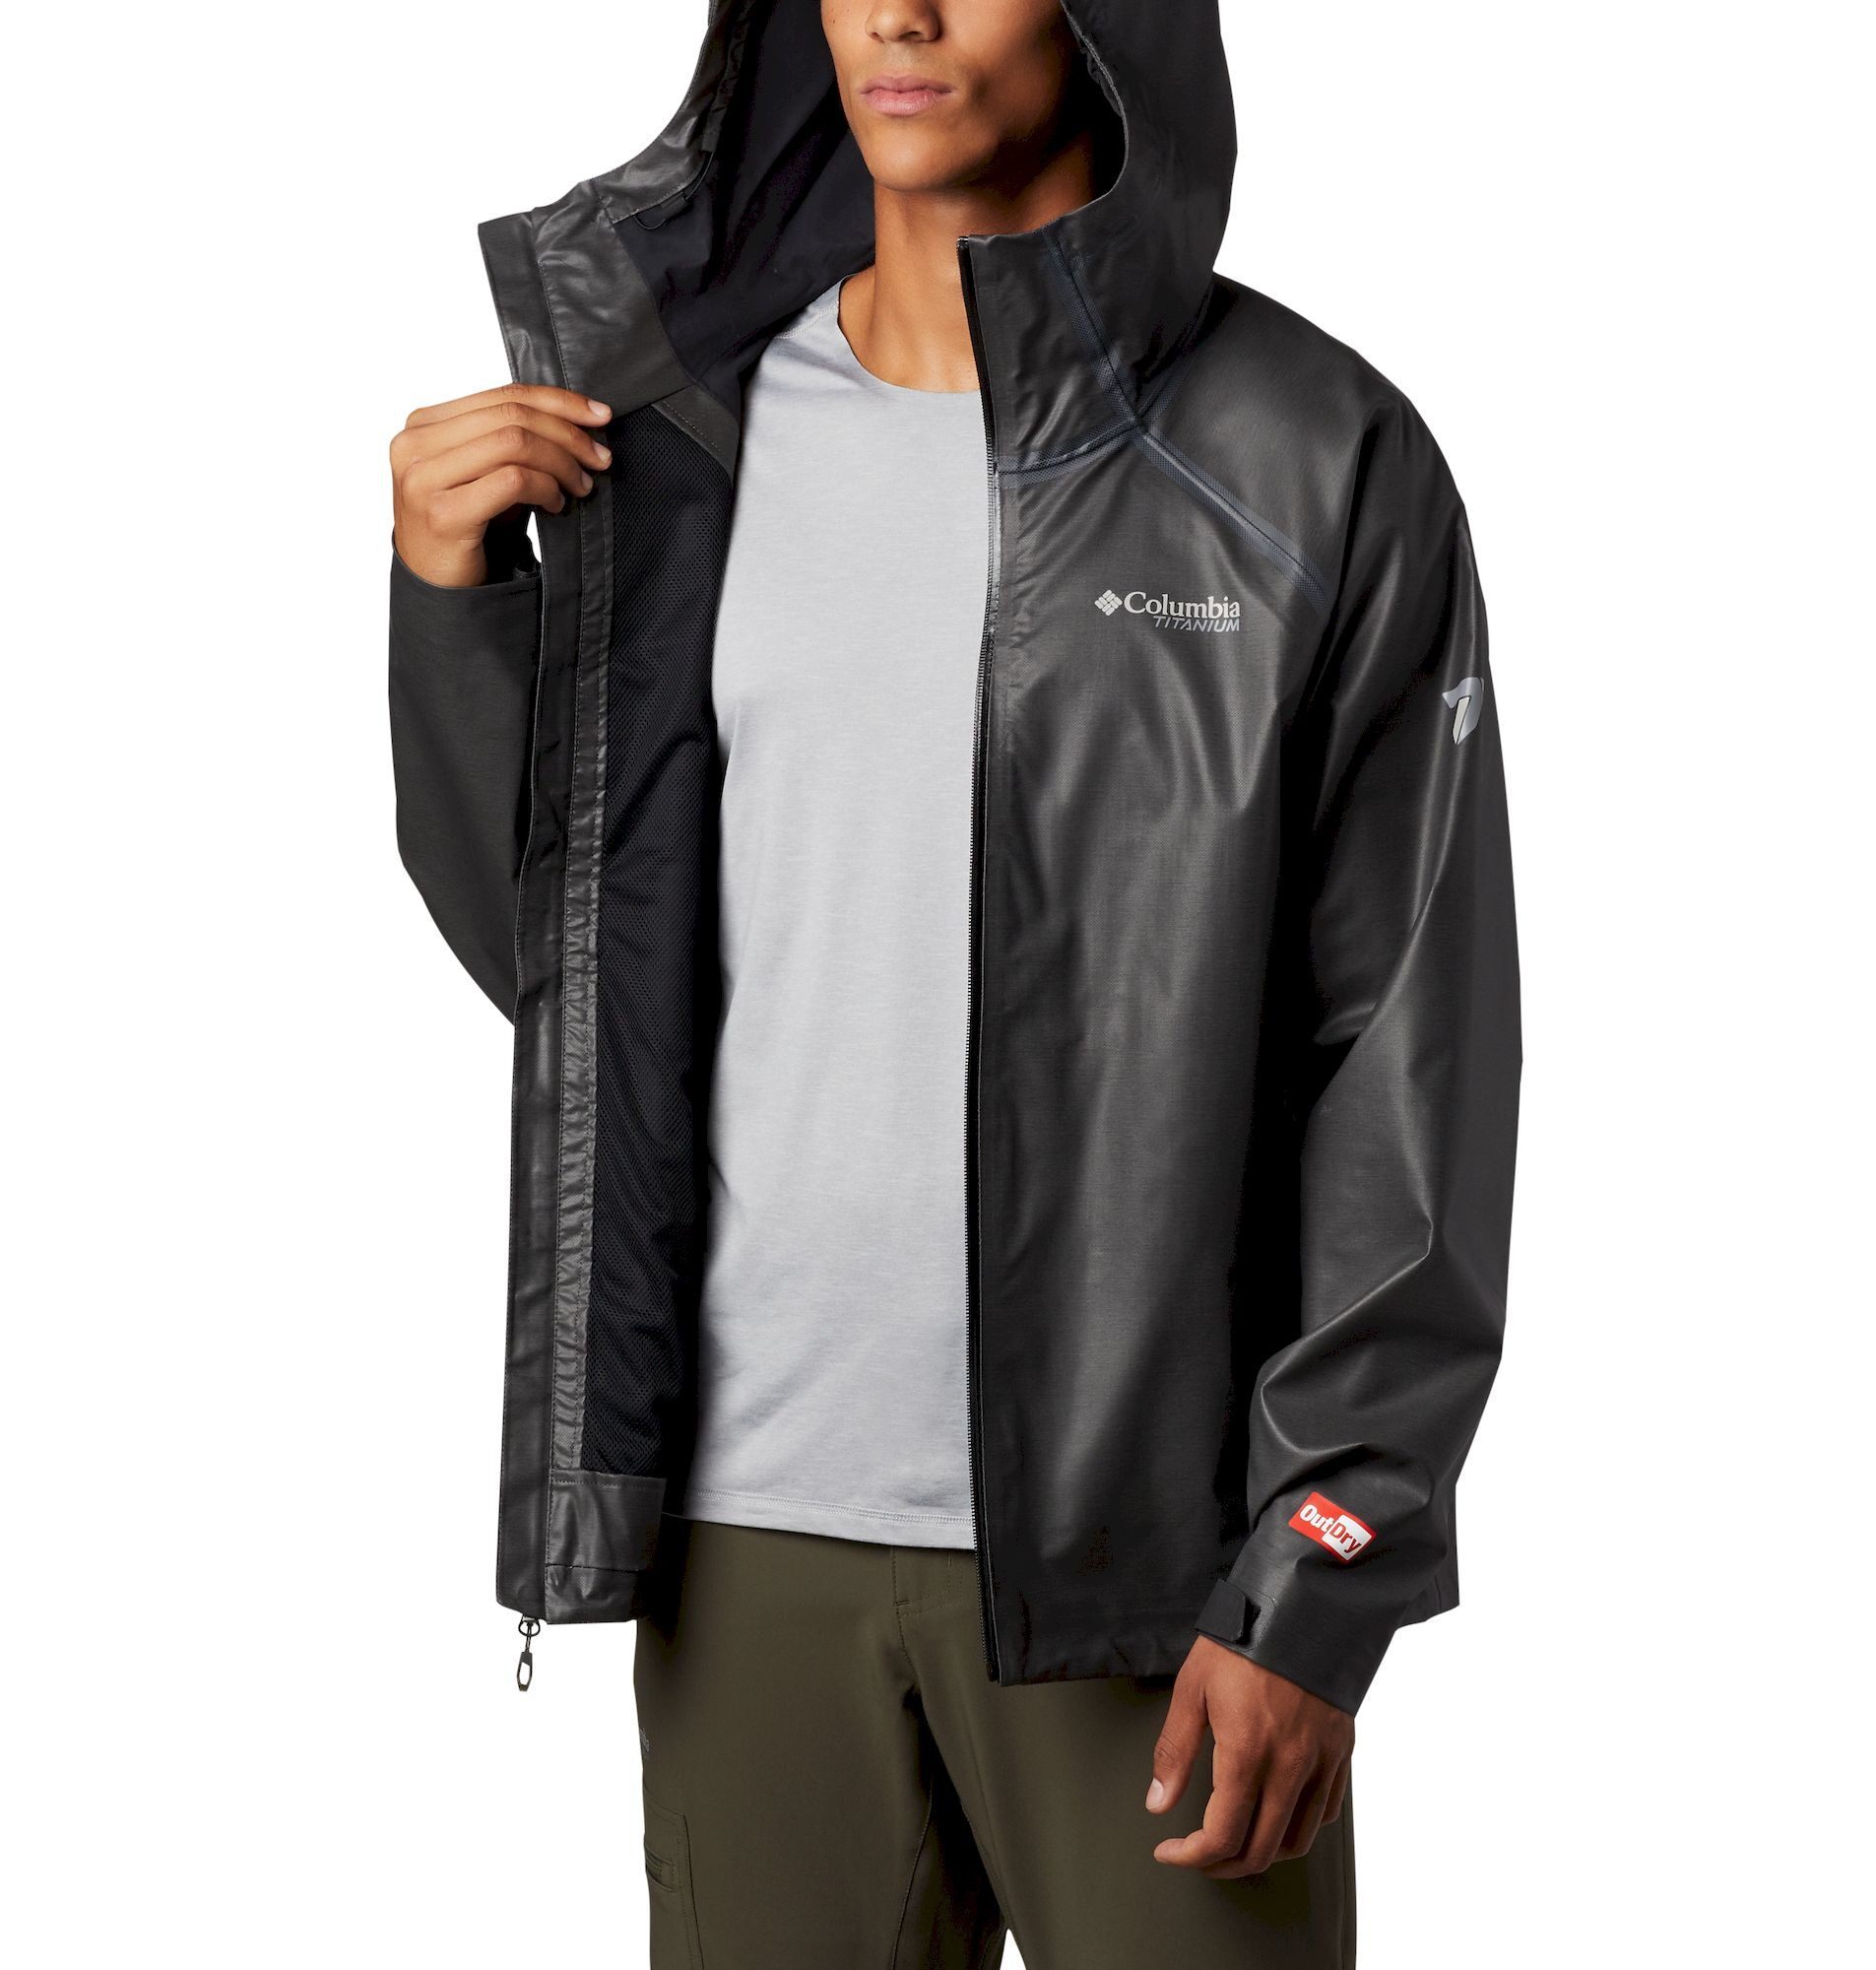 Columbia - OutDry Ex Reign Jacket - Chaqueta impermeable - Hombre